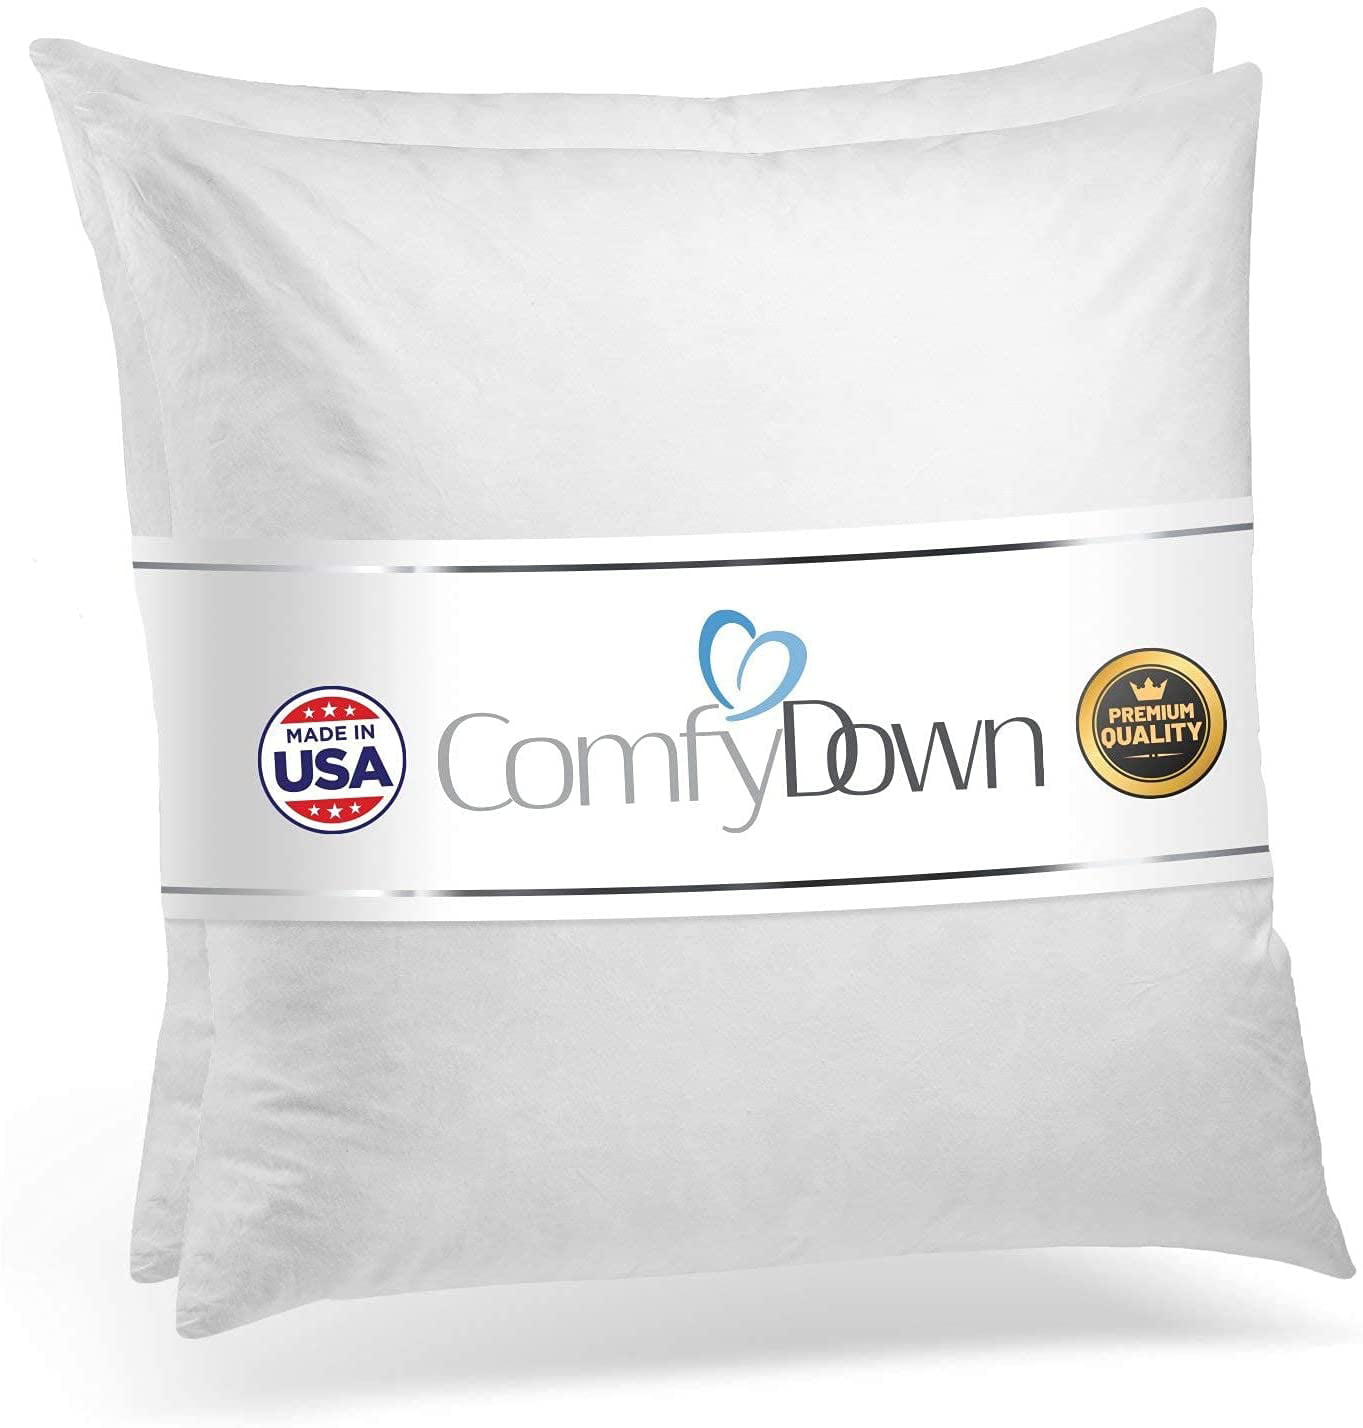 Down and Feather Pillow Insert Set of 2 18x18 Inch The Fabric is Cotton 